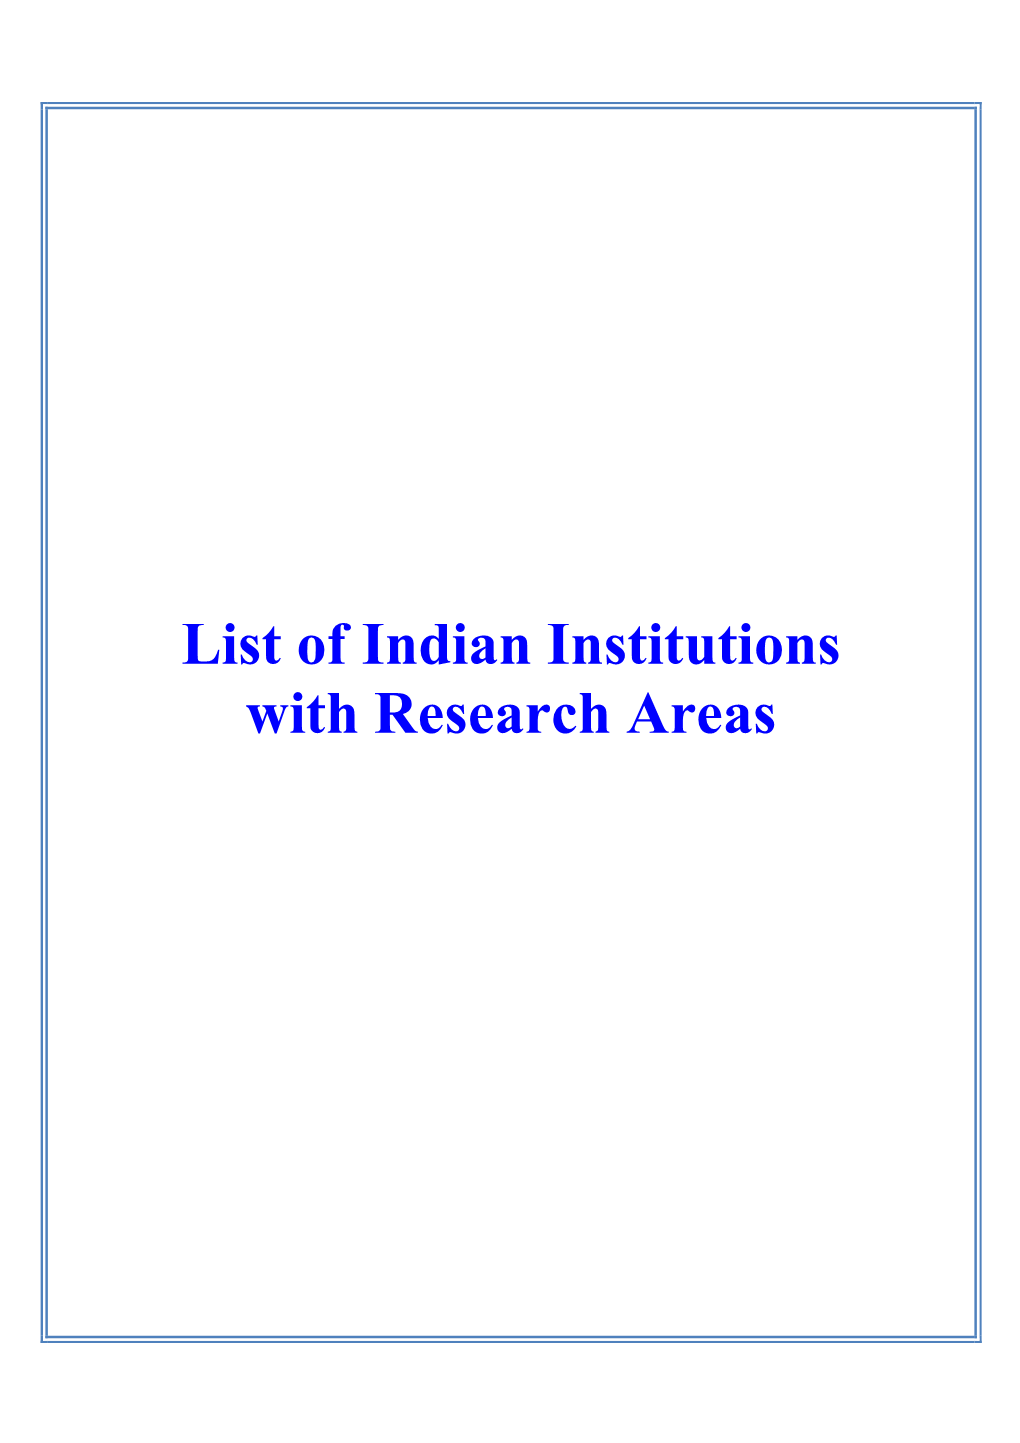 List of Indian Institutions with Research Areas